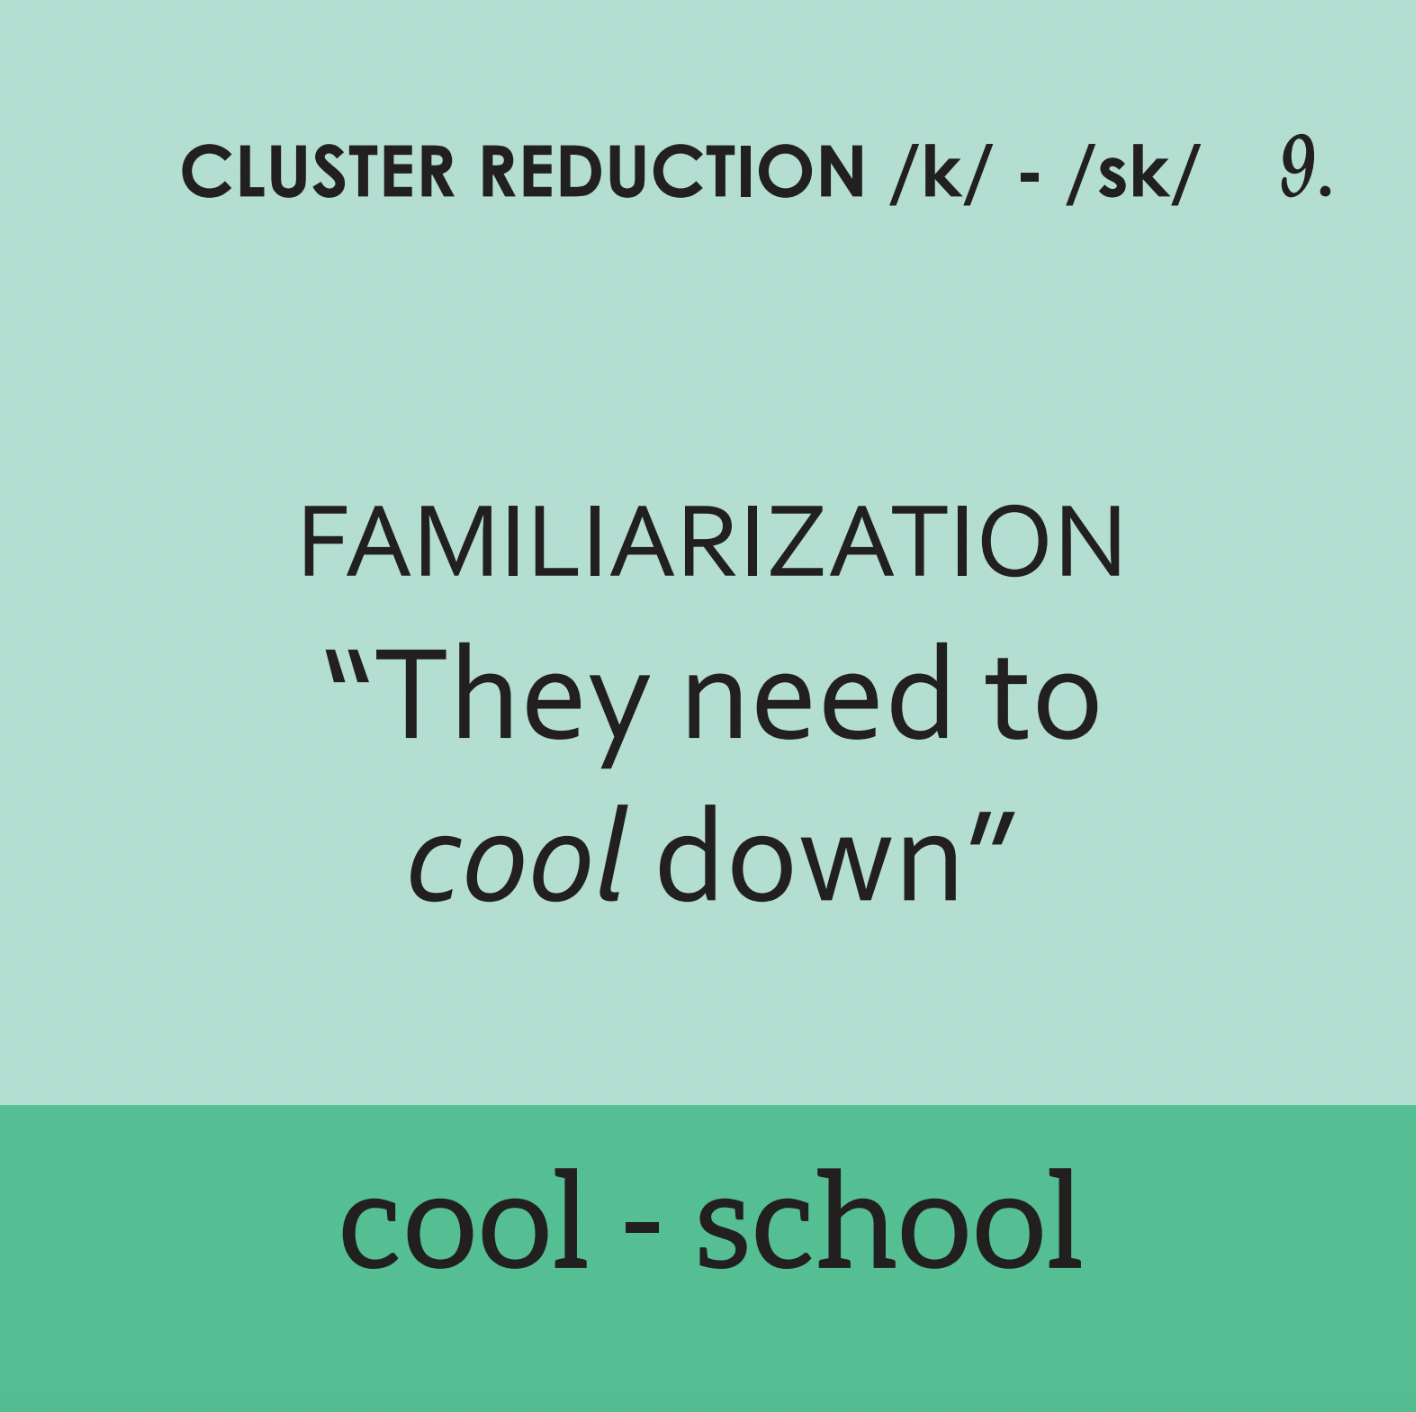 Minimal Pairs: S Cluster Reduction